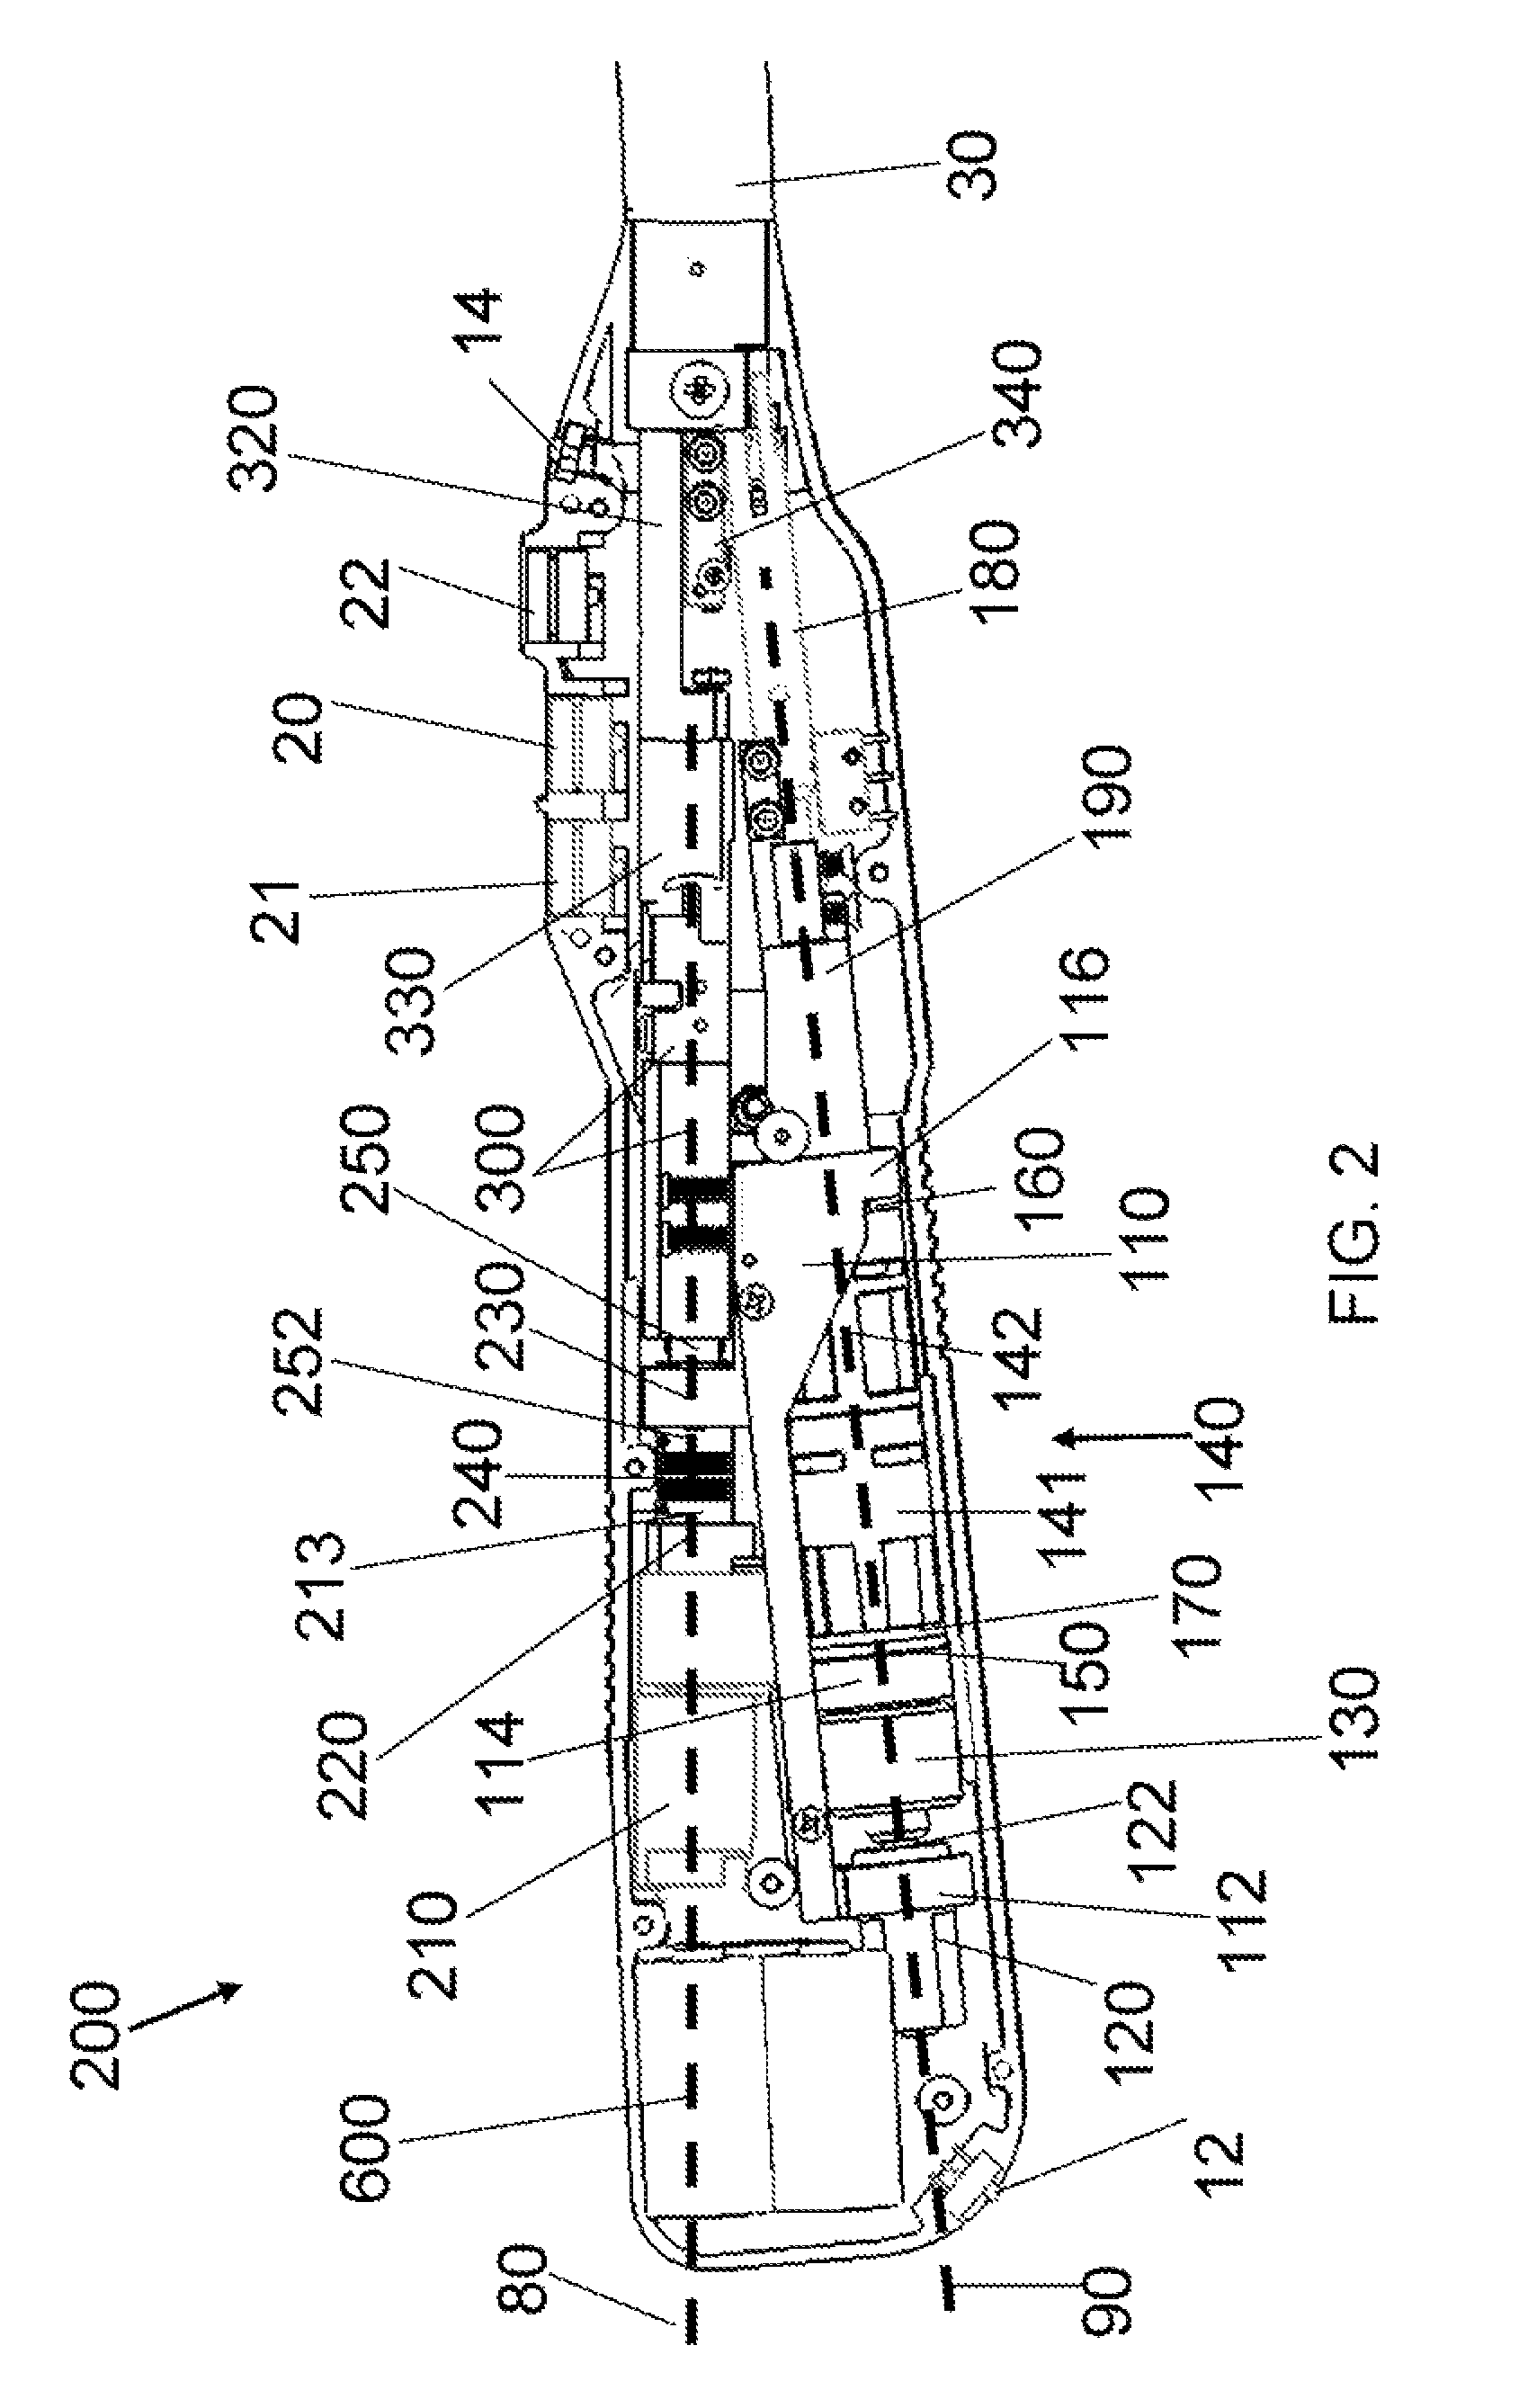 Active braking electrical surgical instrument and method for braking such an instrument